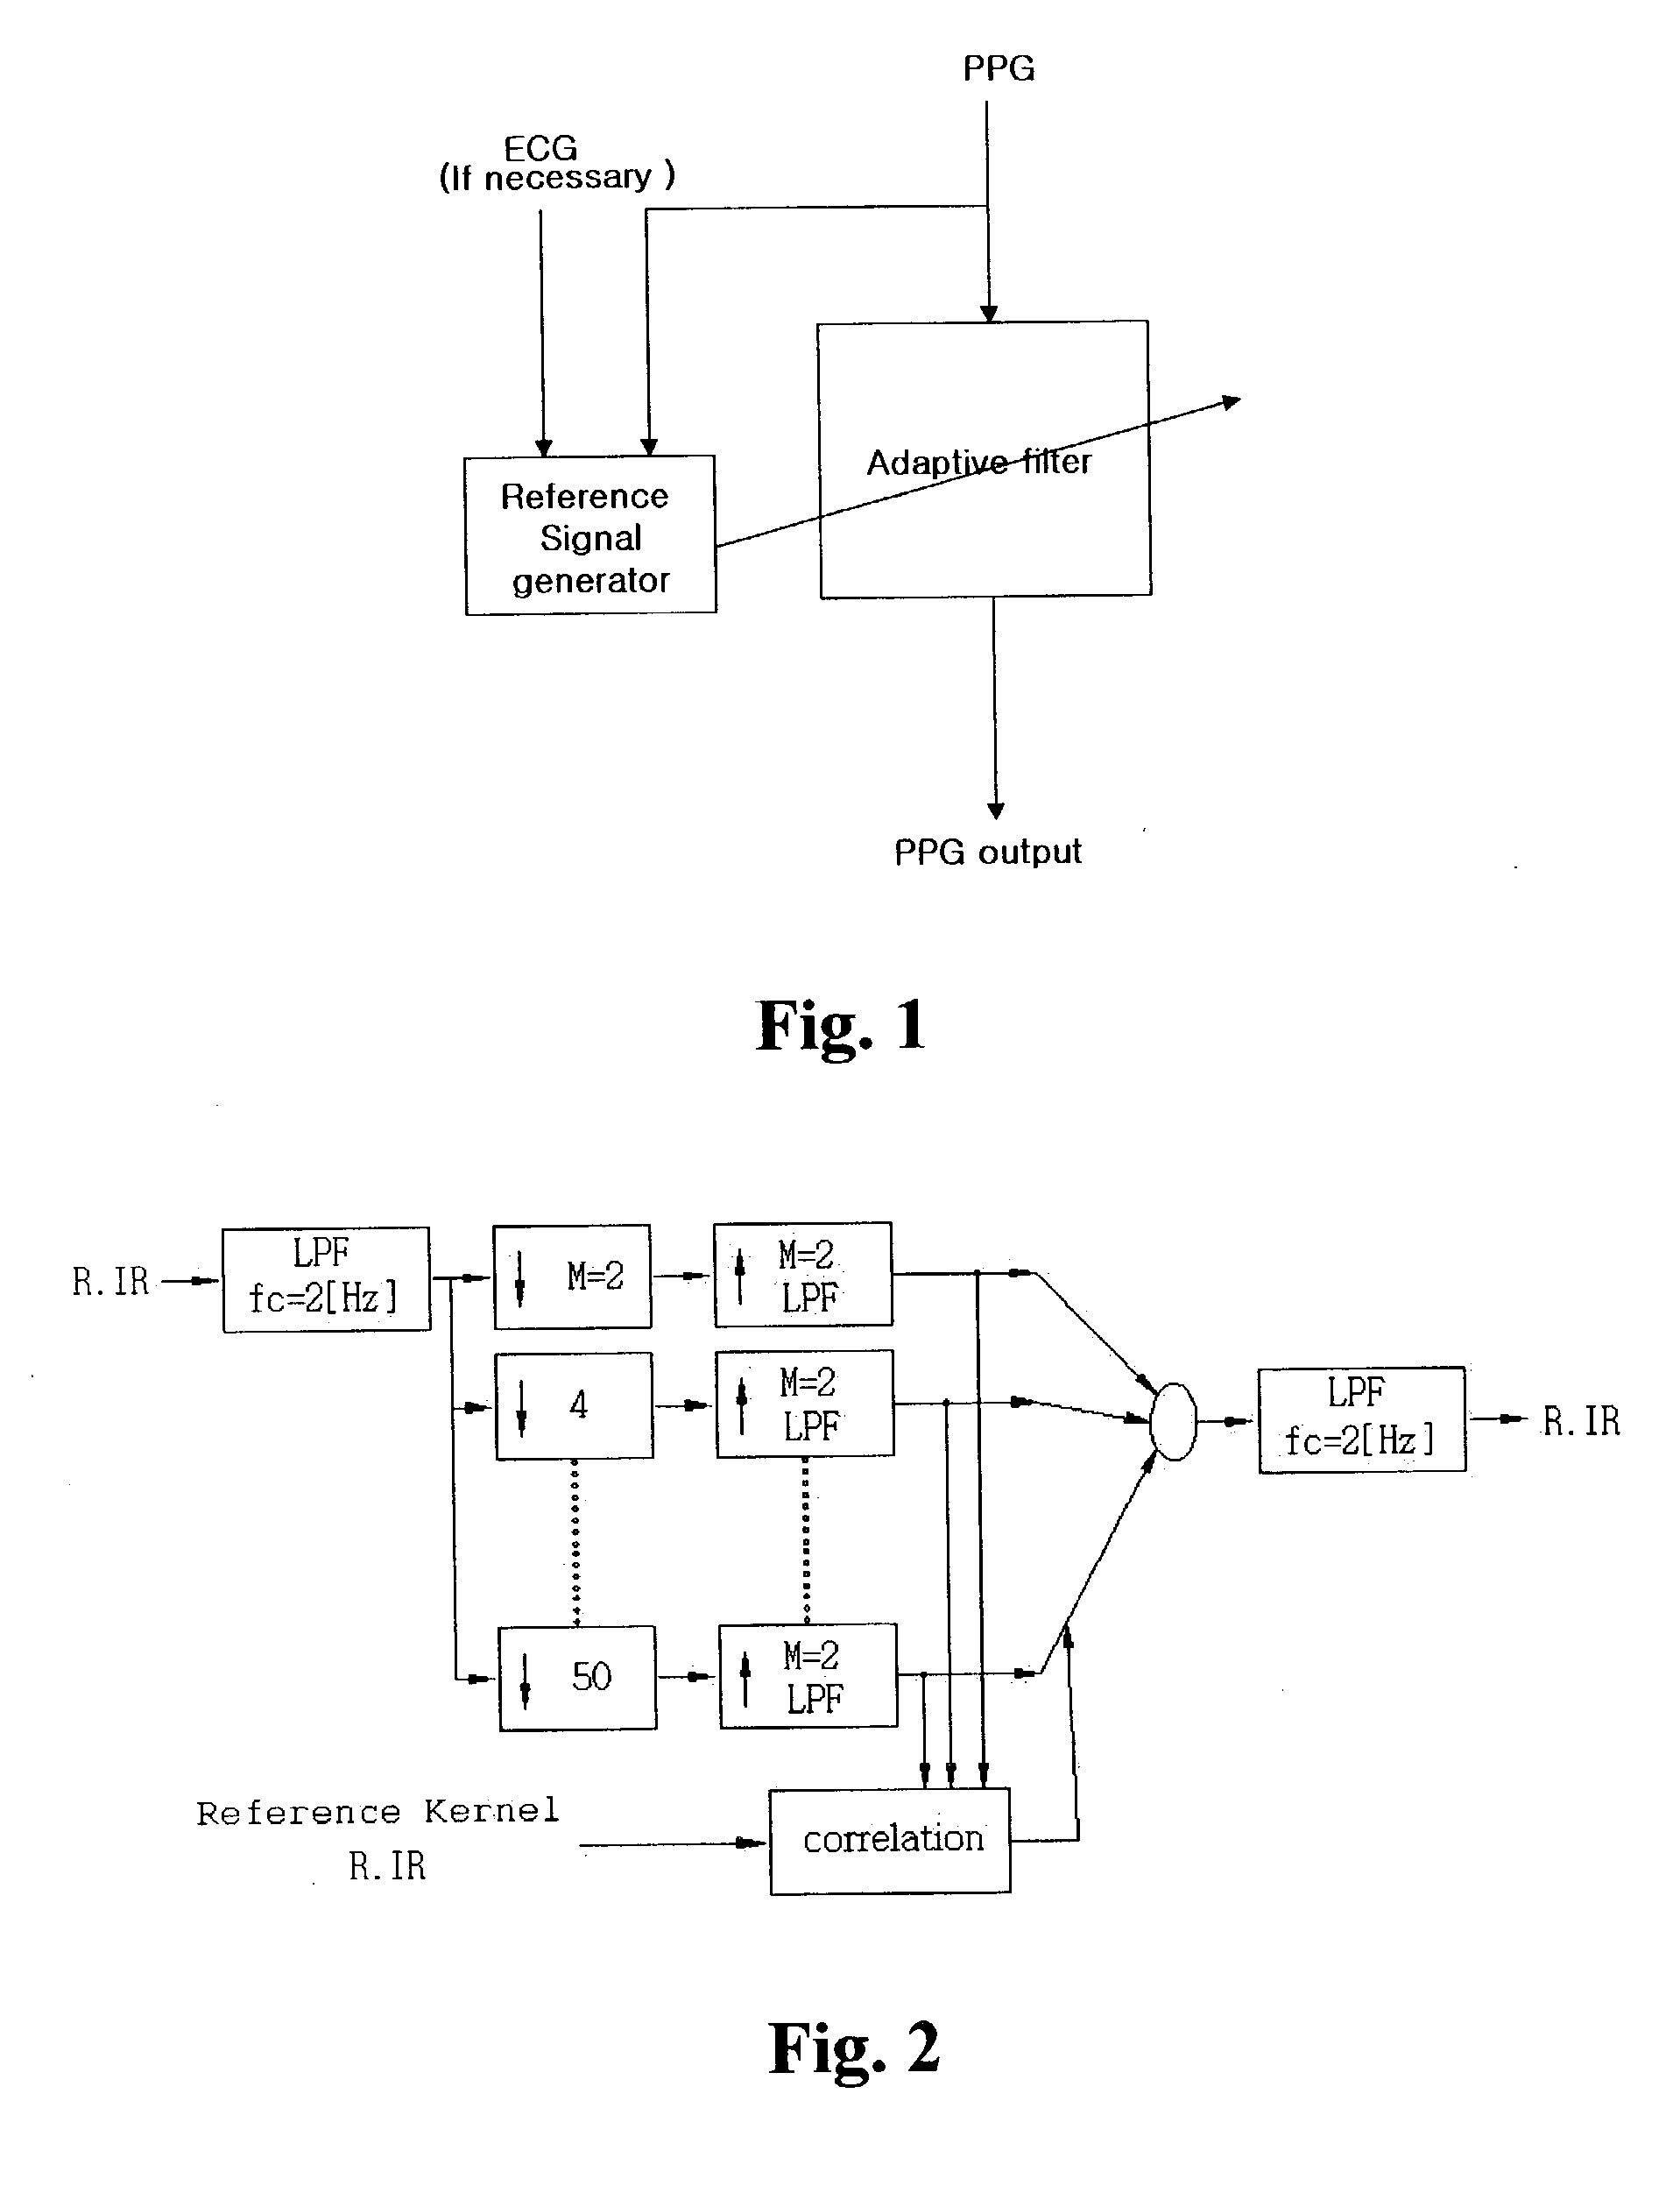 Apparatus and method for detecting heartbeat using PPG